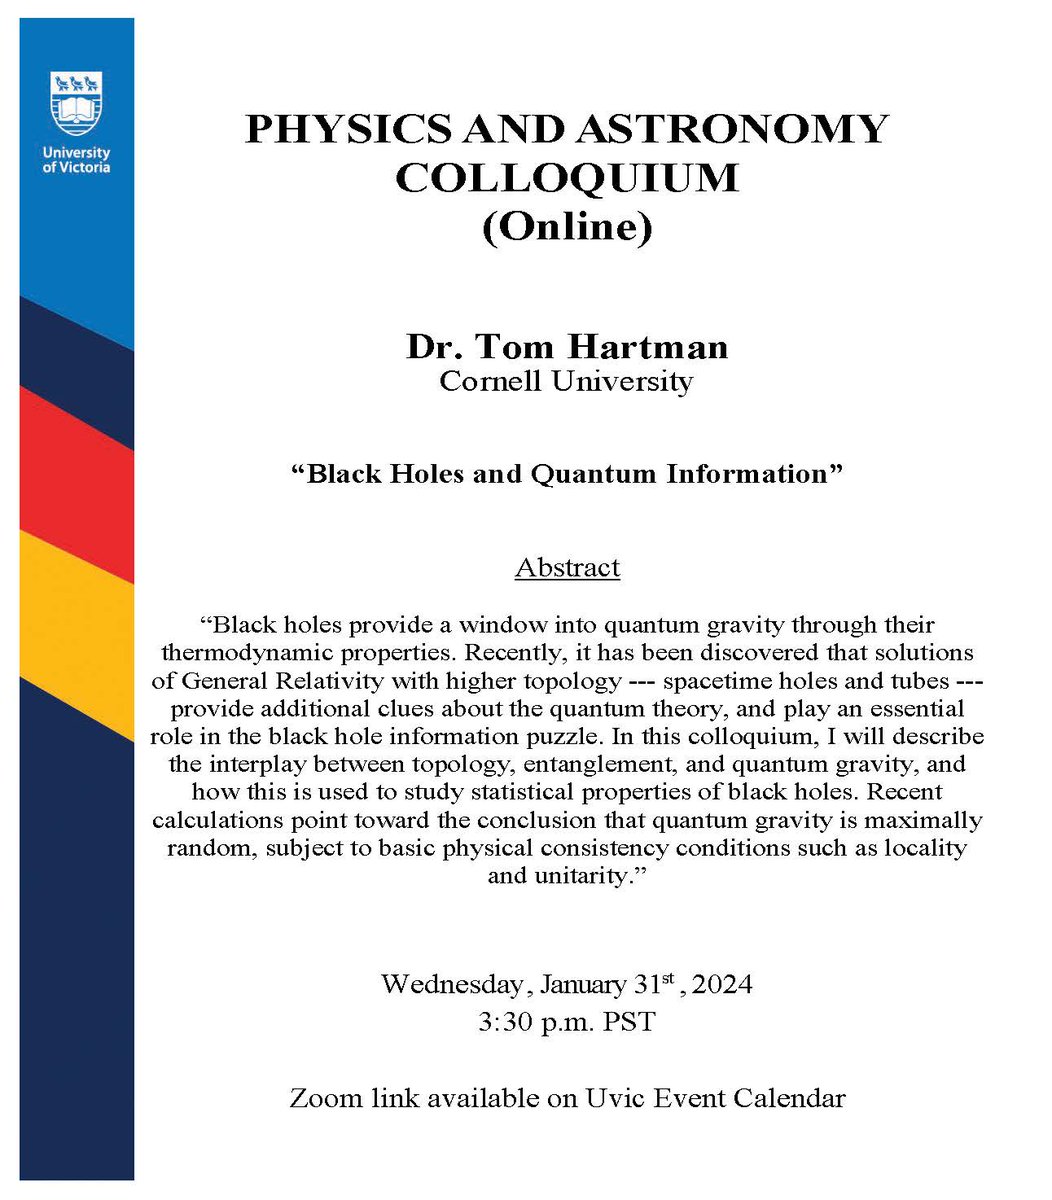 COLLOQUIUM (Online): Dr. Tom Hartman, Cornell University, will give an online colloquium on Wednesday January 31st at 3:30pm PST. For more information: events.uvic.ca/physics/event/…